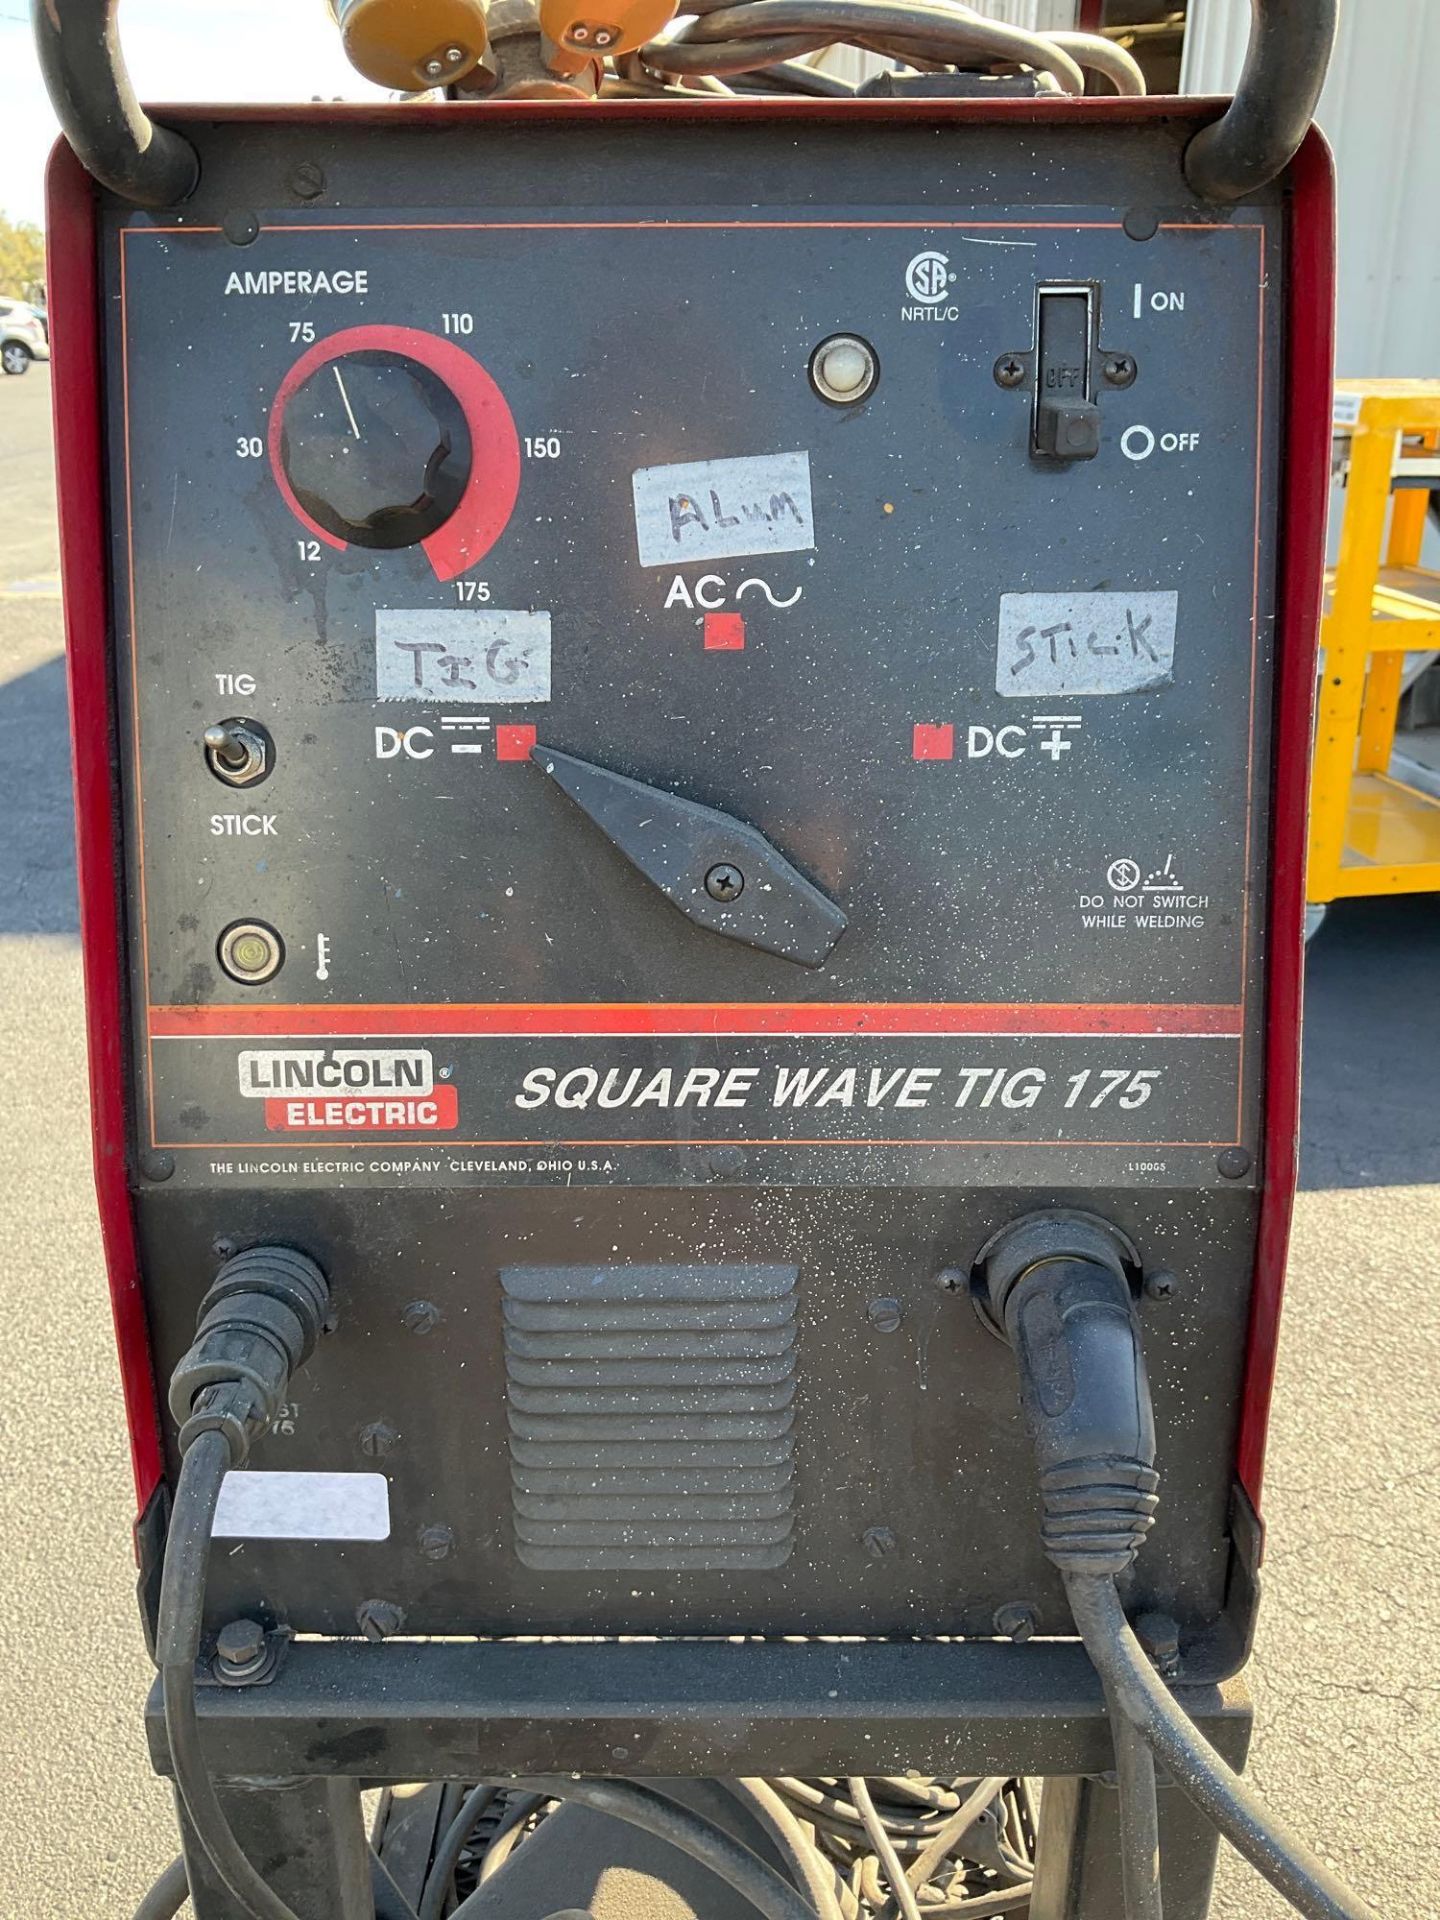 LINCOLN ELECTRIC SQUARE WAVE TIG 175 WELDER - Image 9 of 10